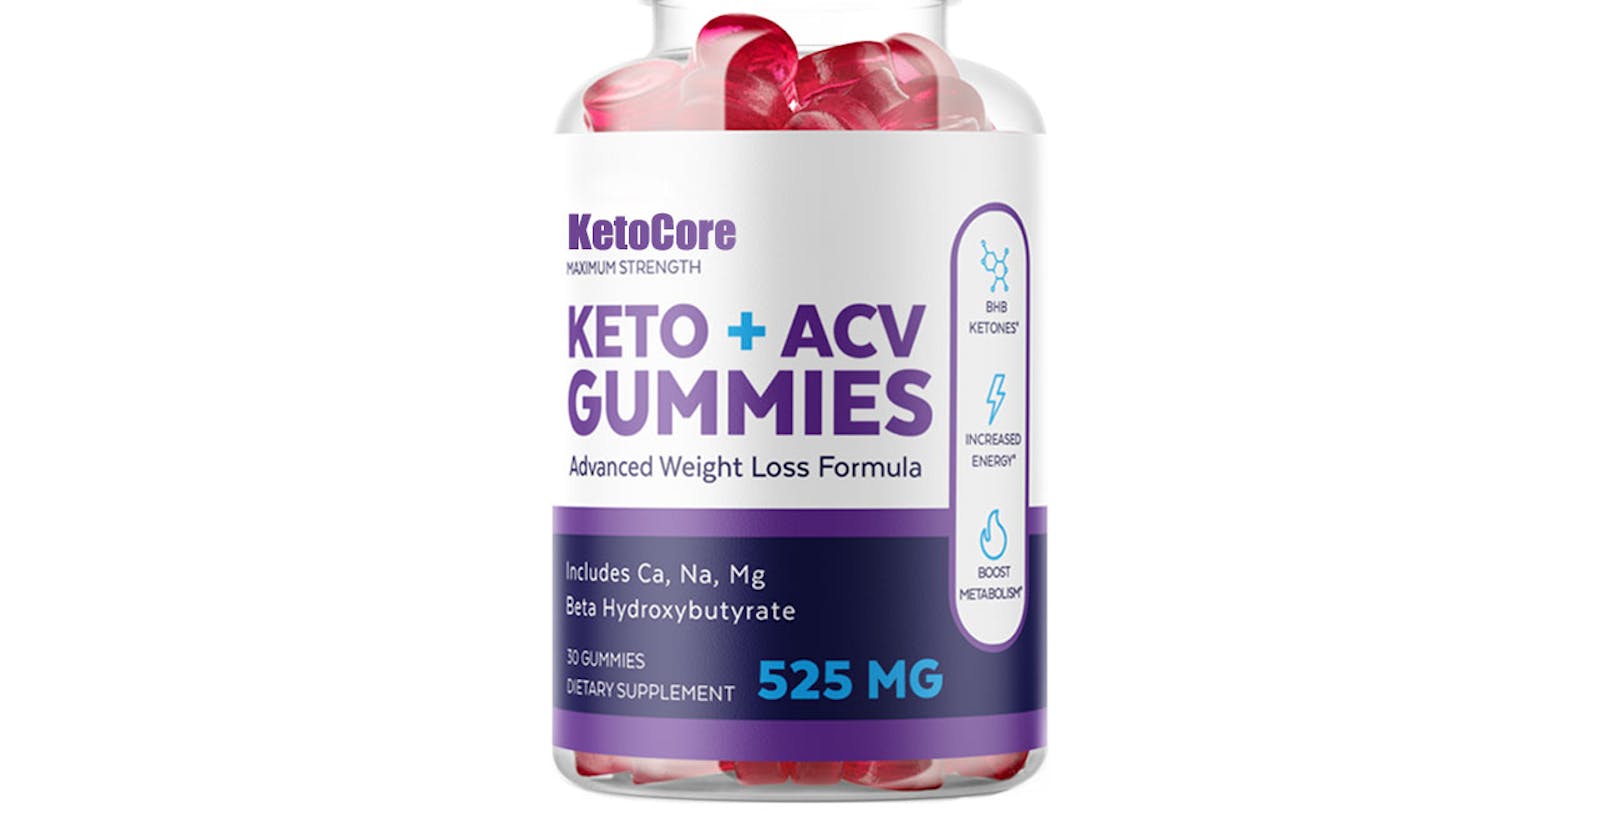 Keto Core ACV Gummies Canada: Experience the Benefits of Keto and ACV in One Delicious Gummy